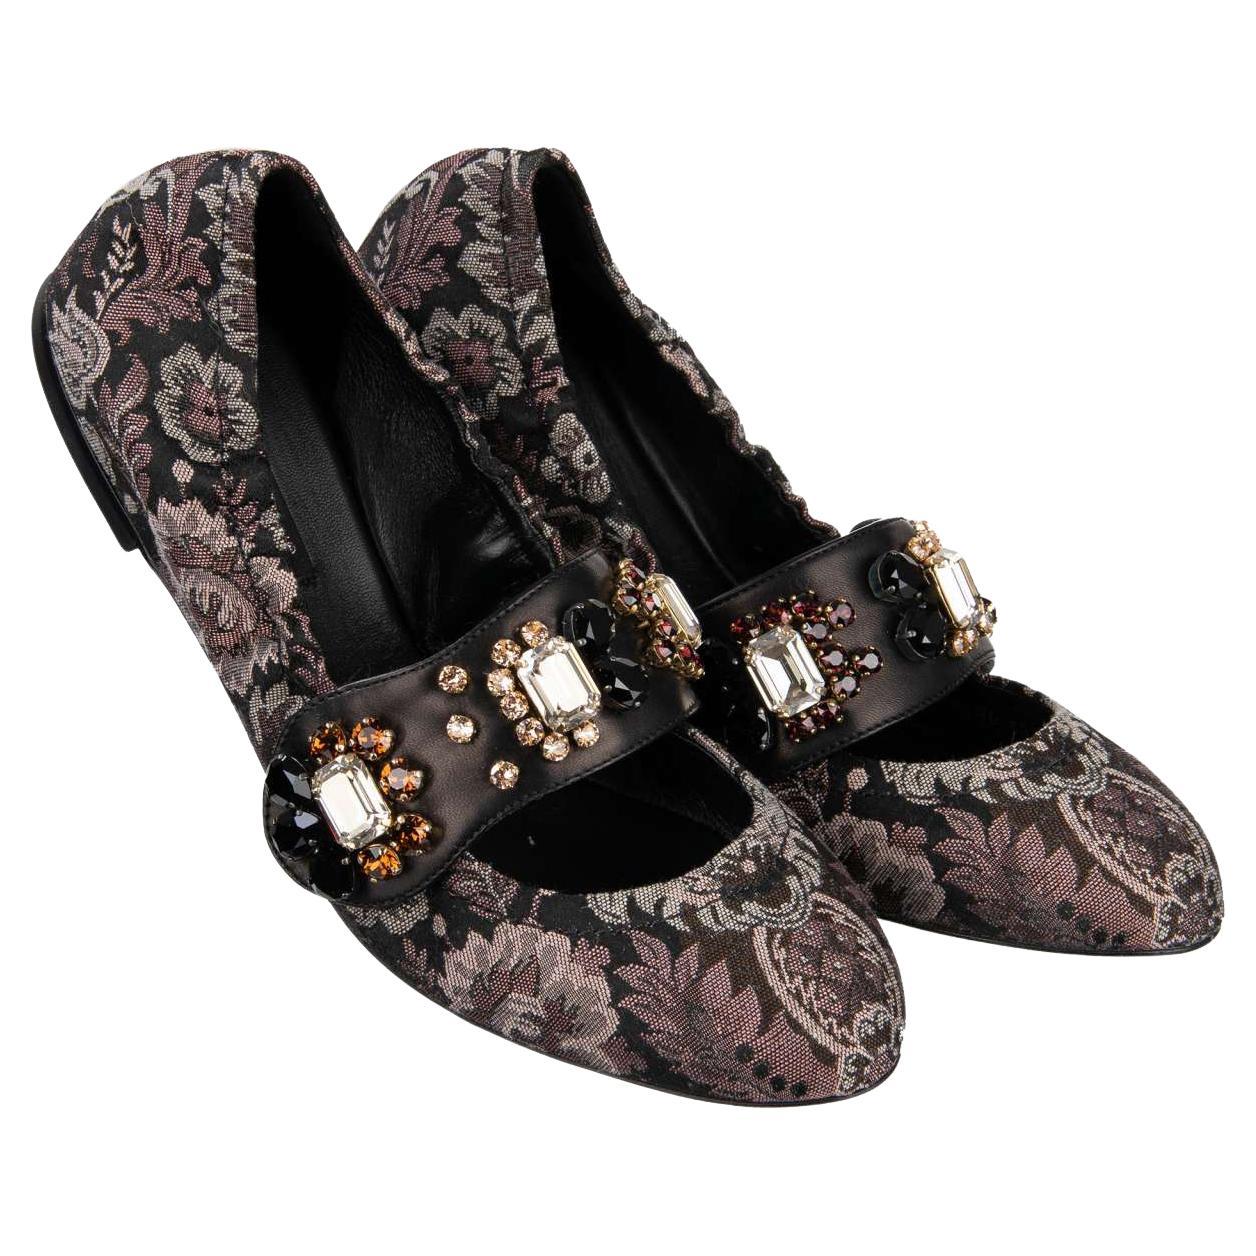 Dolce & Gabbana - Brocade Ballet Flats VALLY with Crystals 38.5 For Sale